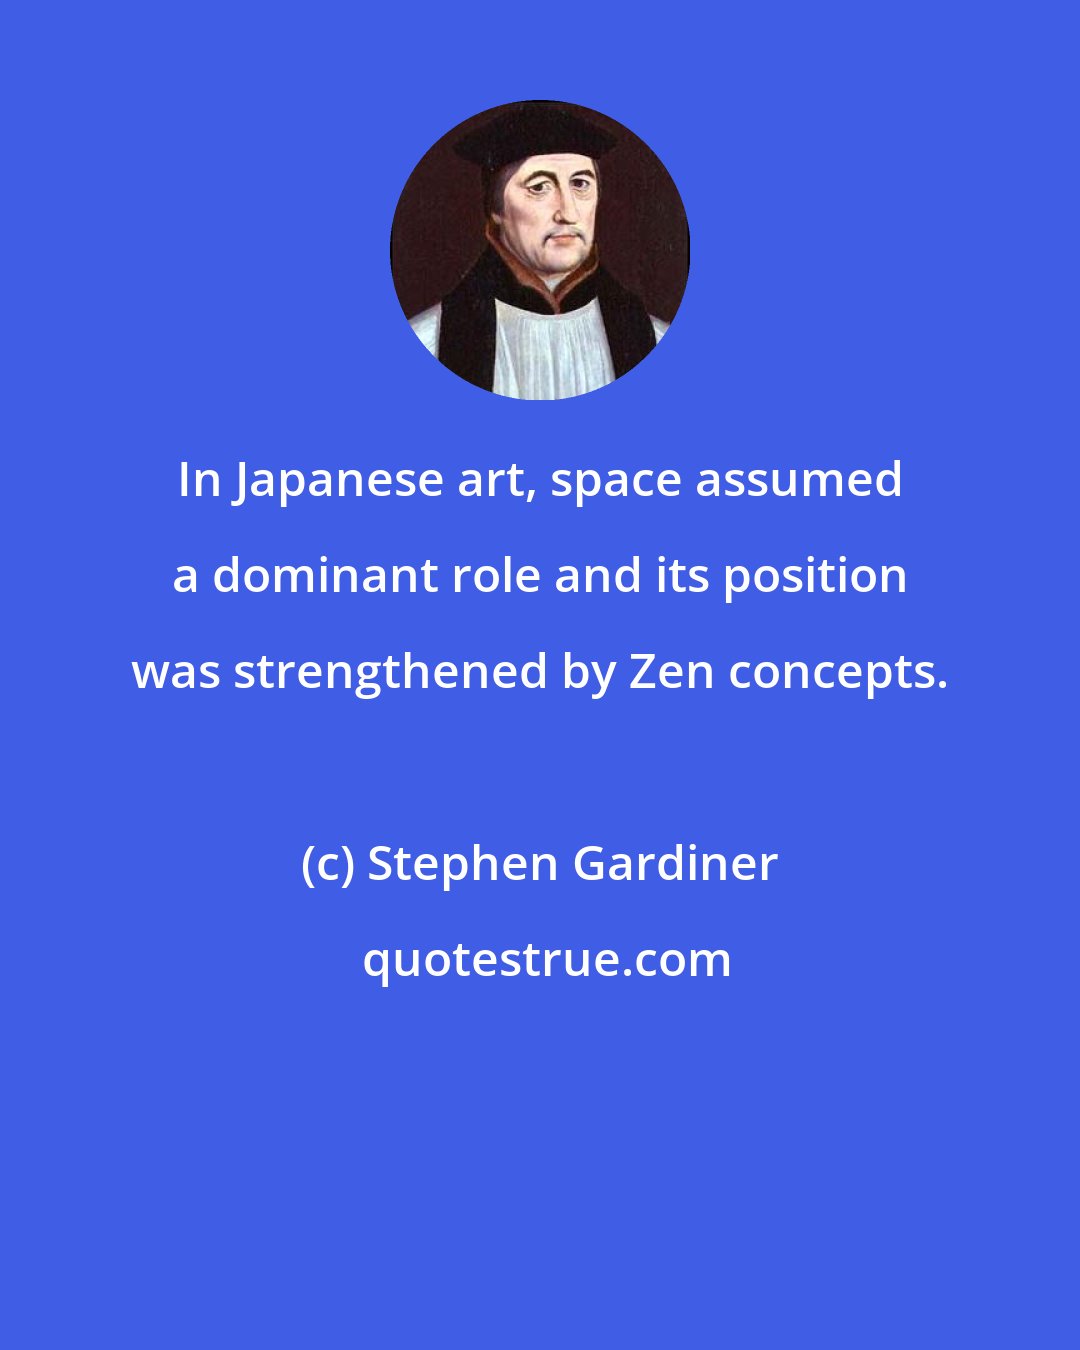 Stephen Gardiner: In Japanese art, space assumed a dominant role and its position was strengthened by Zen concepts.